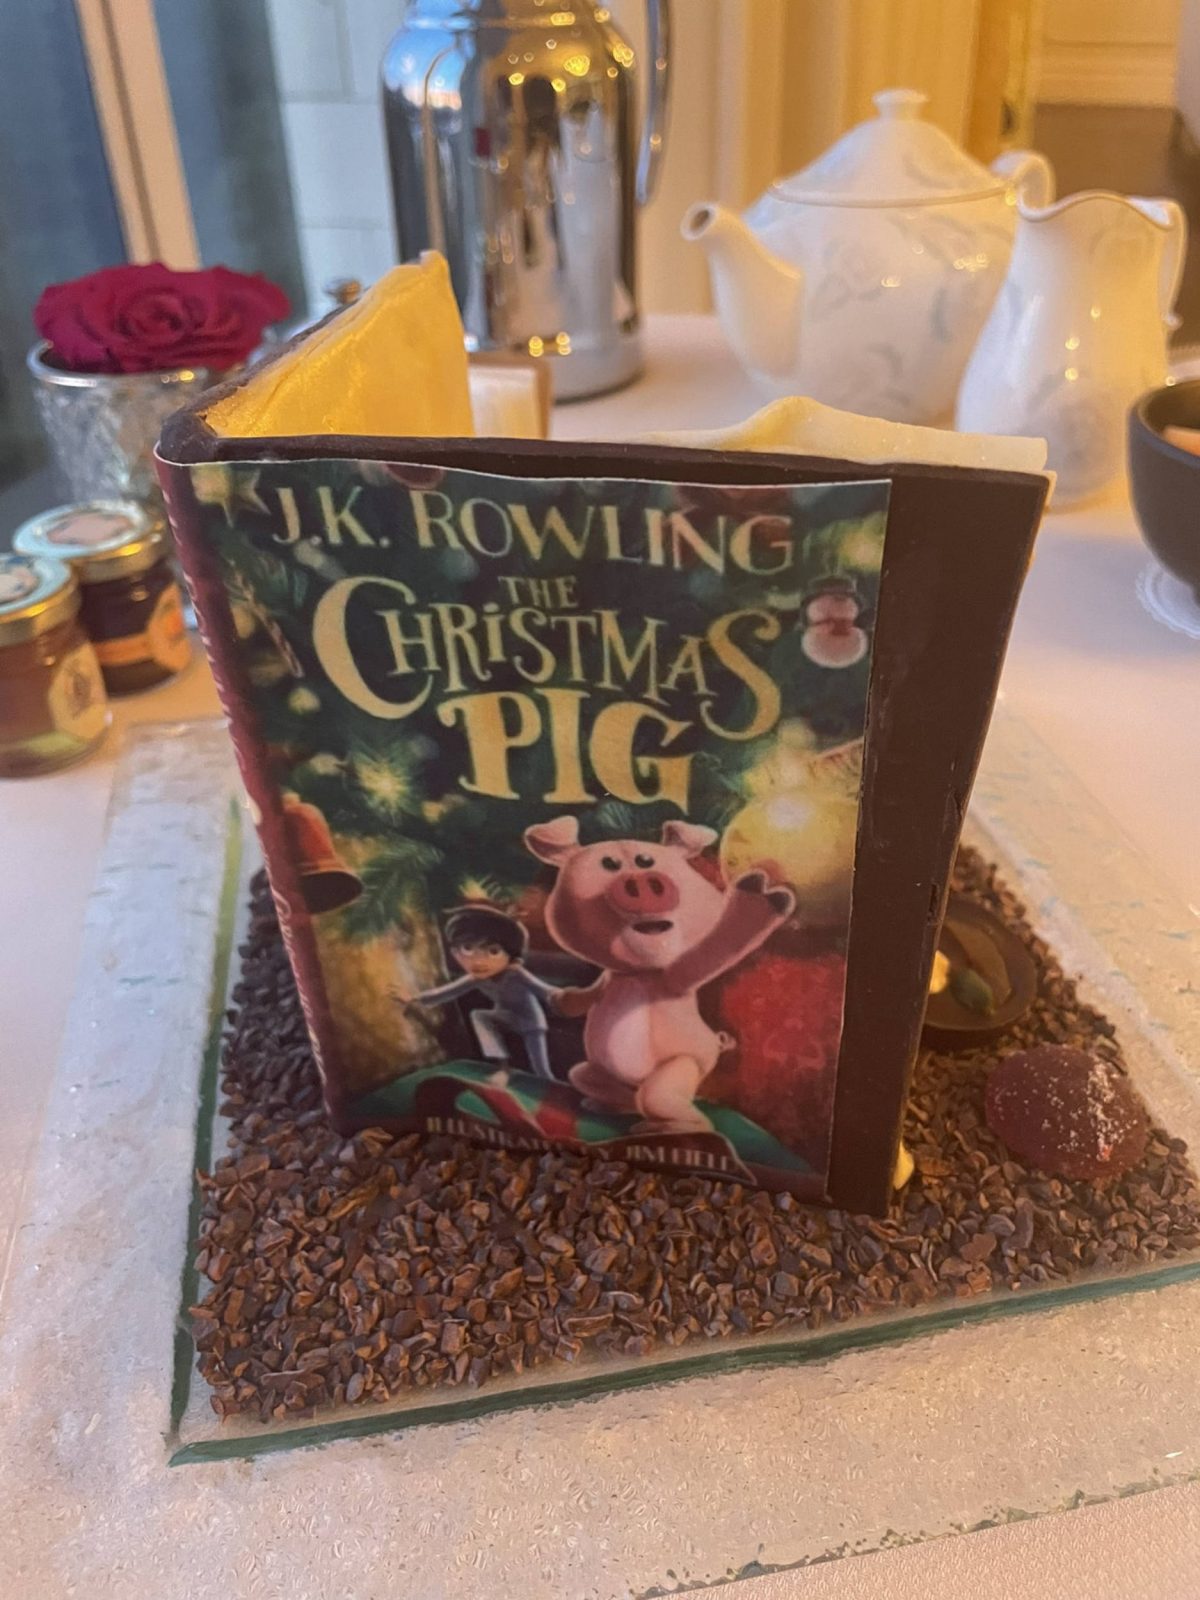 The cover of the chocolate book Rowling received.